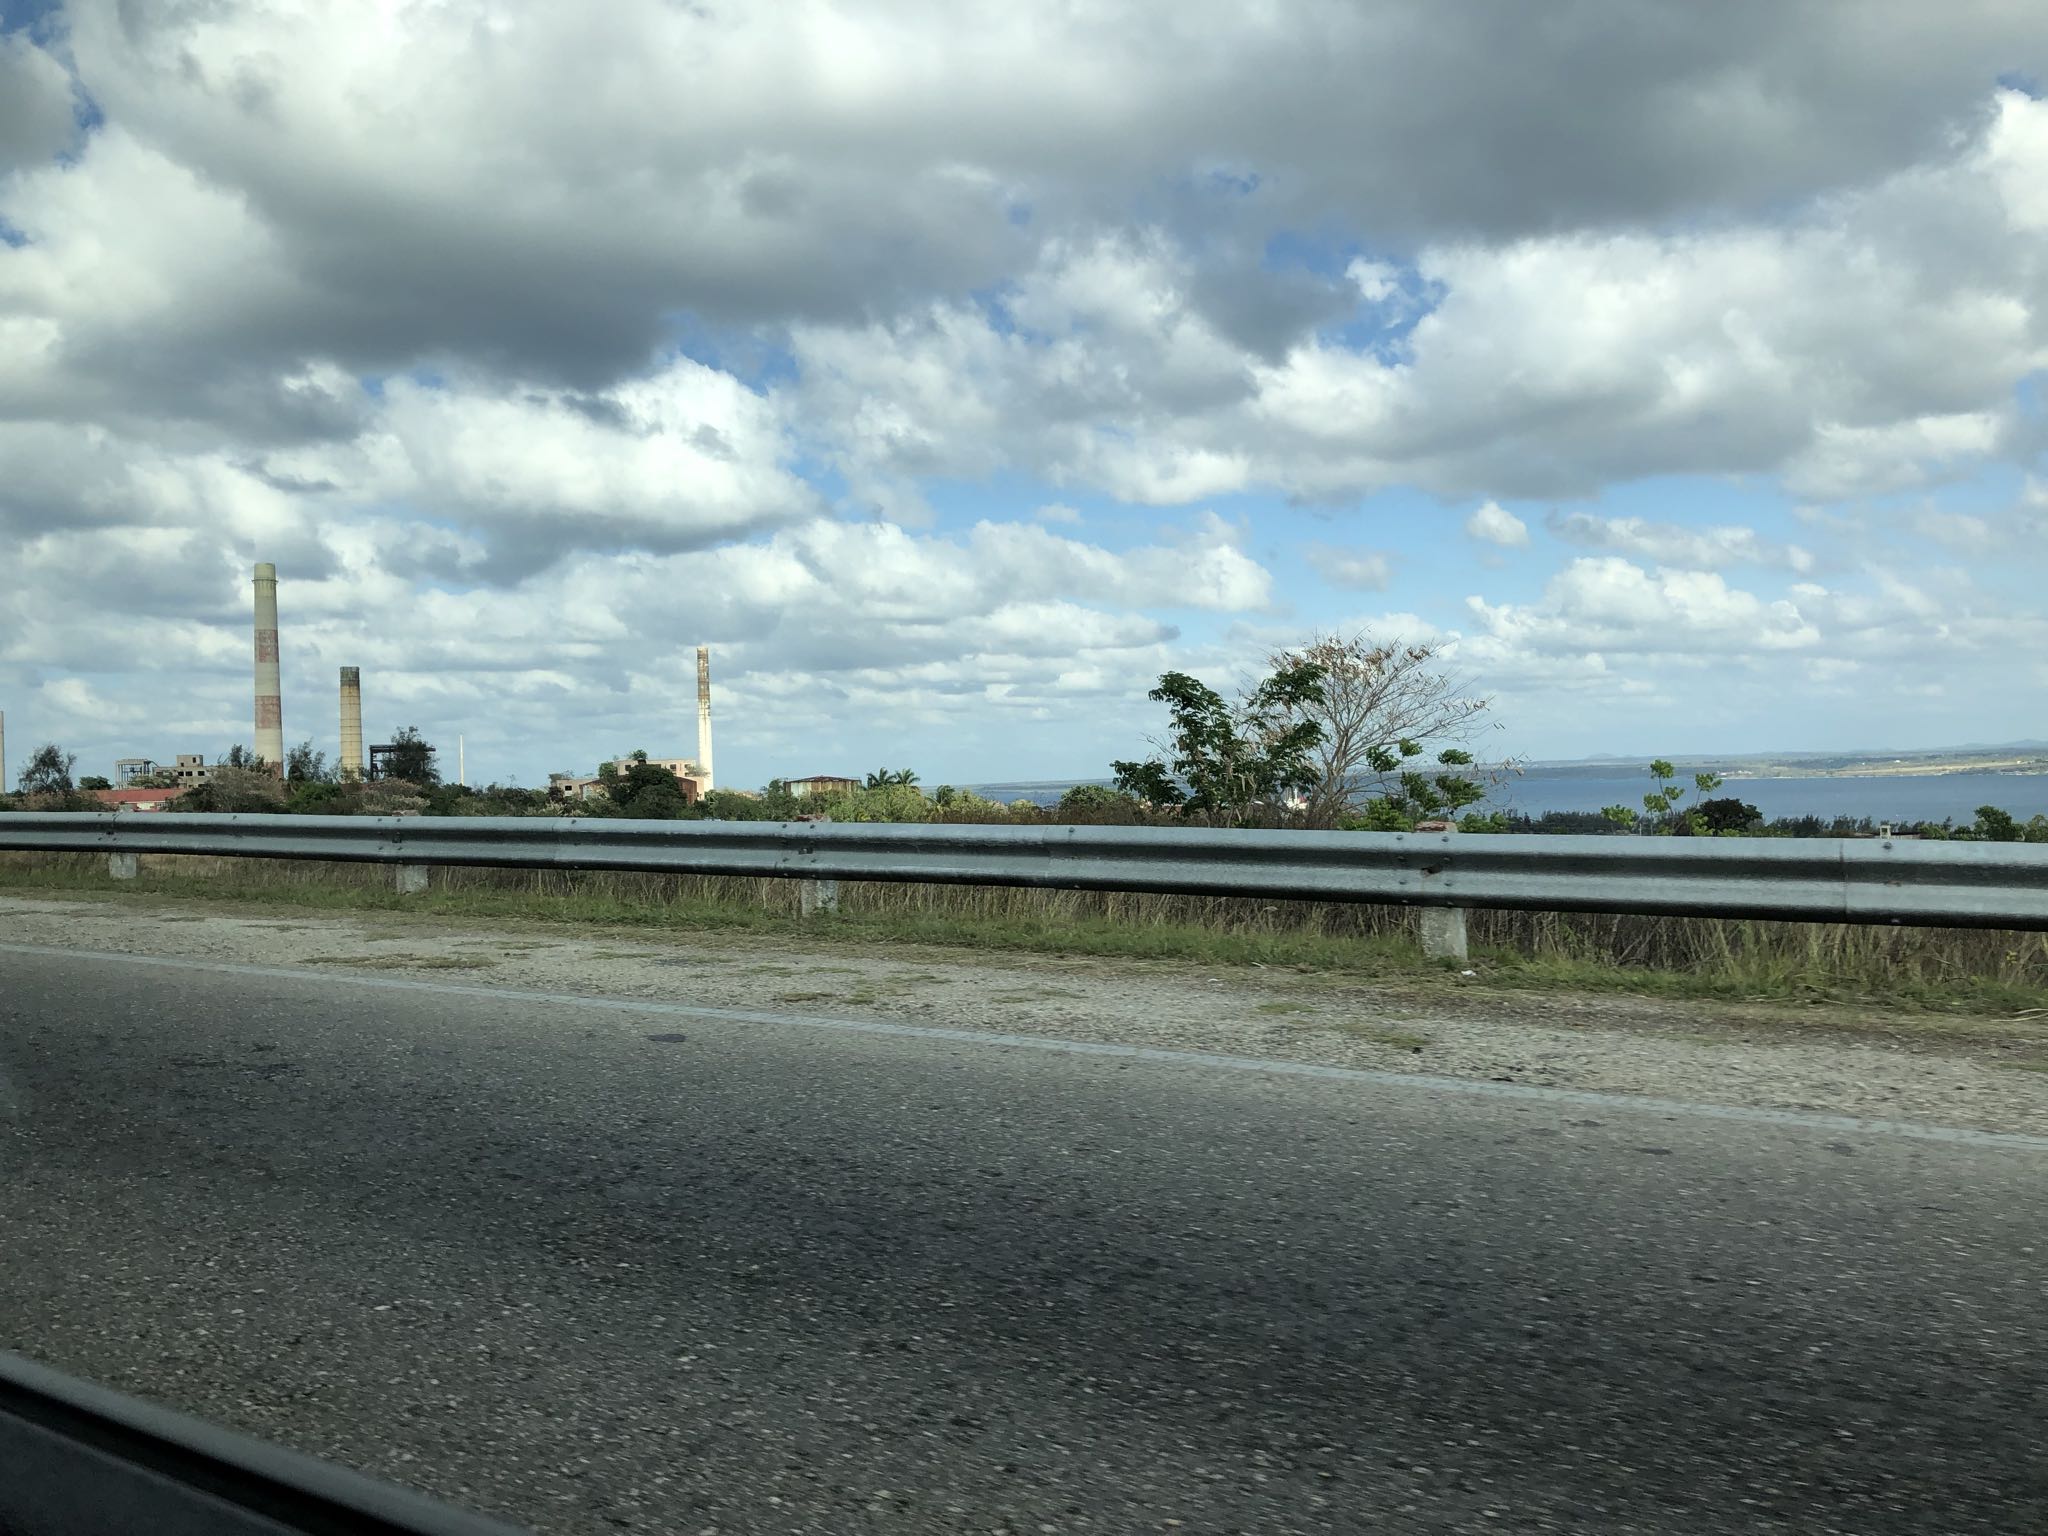 Photo 214 of 221 from the album Highlights Cuba 2019.